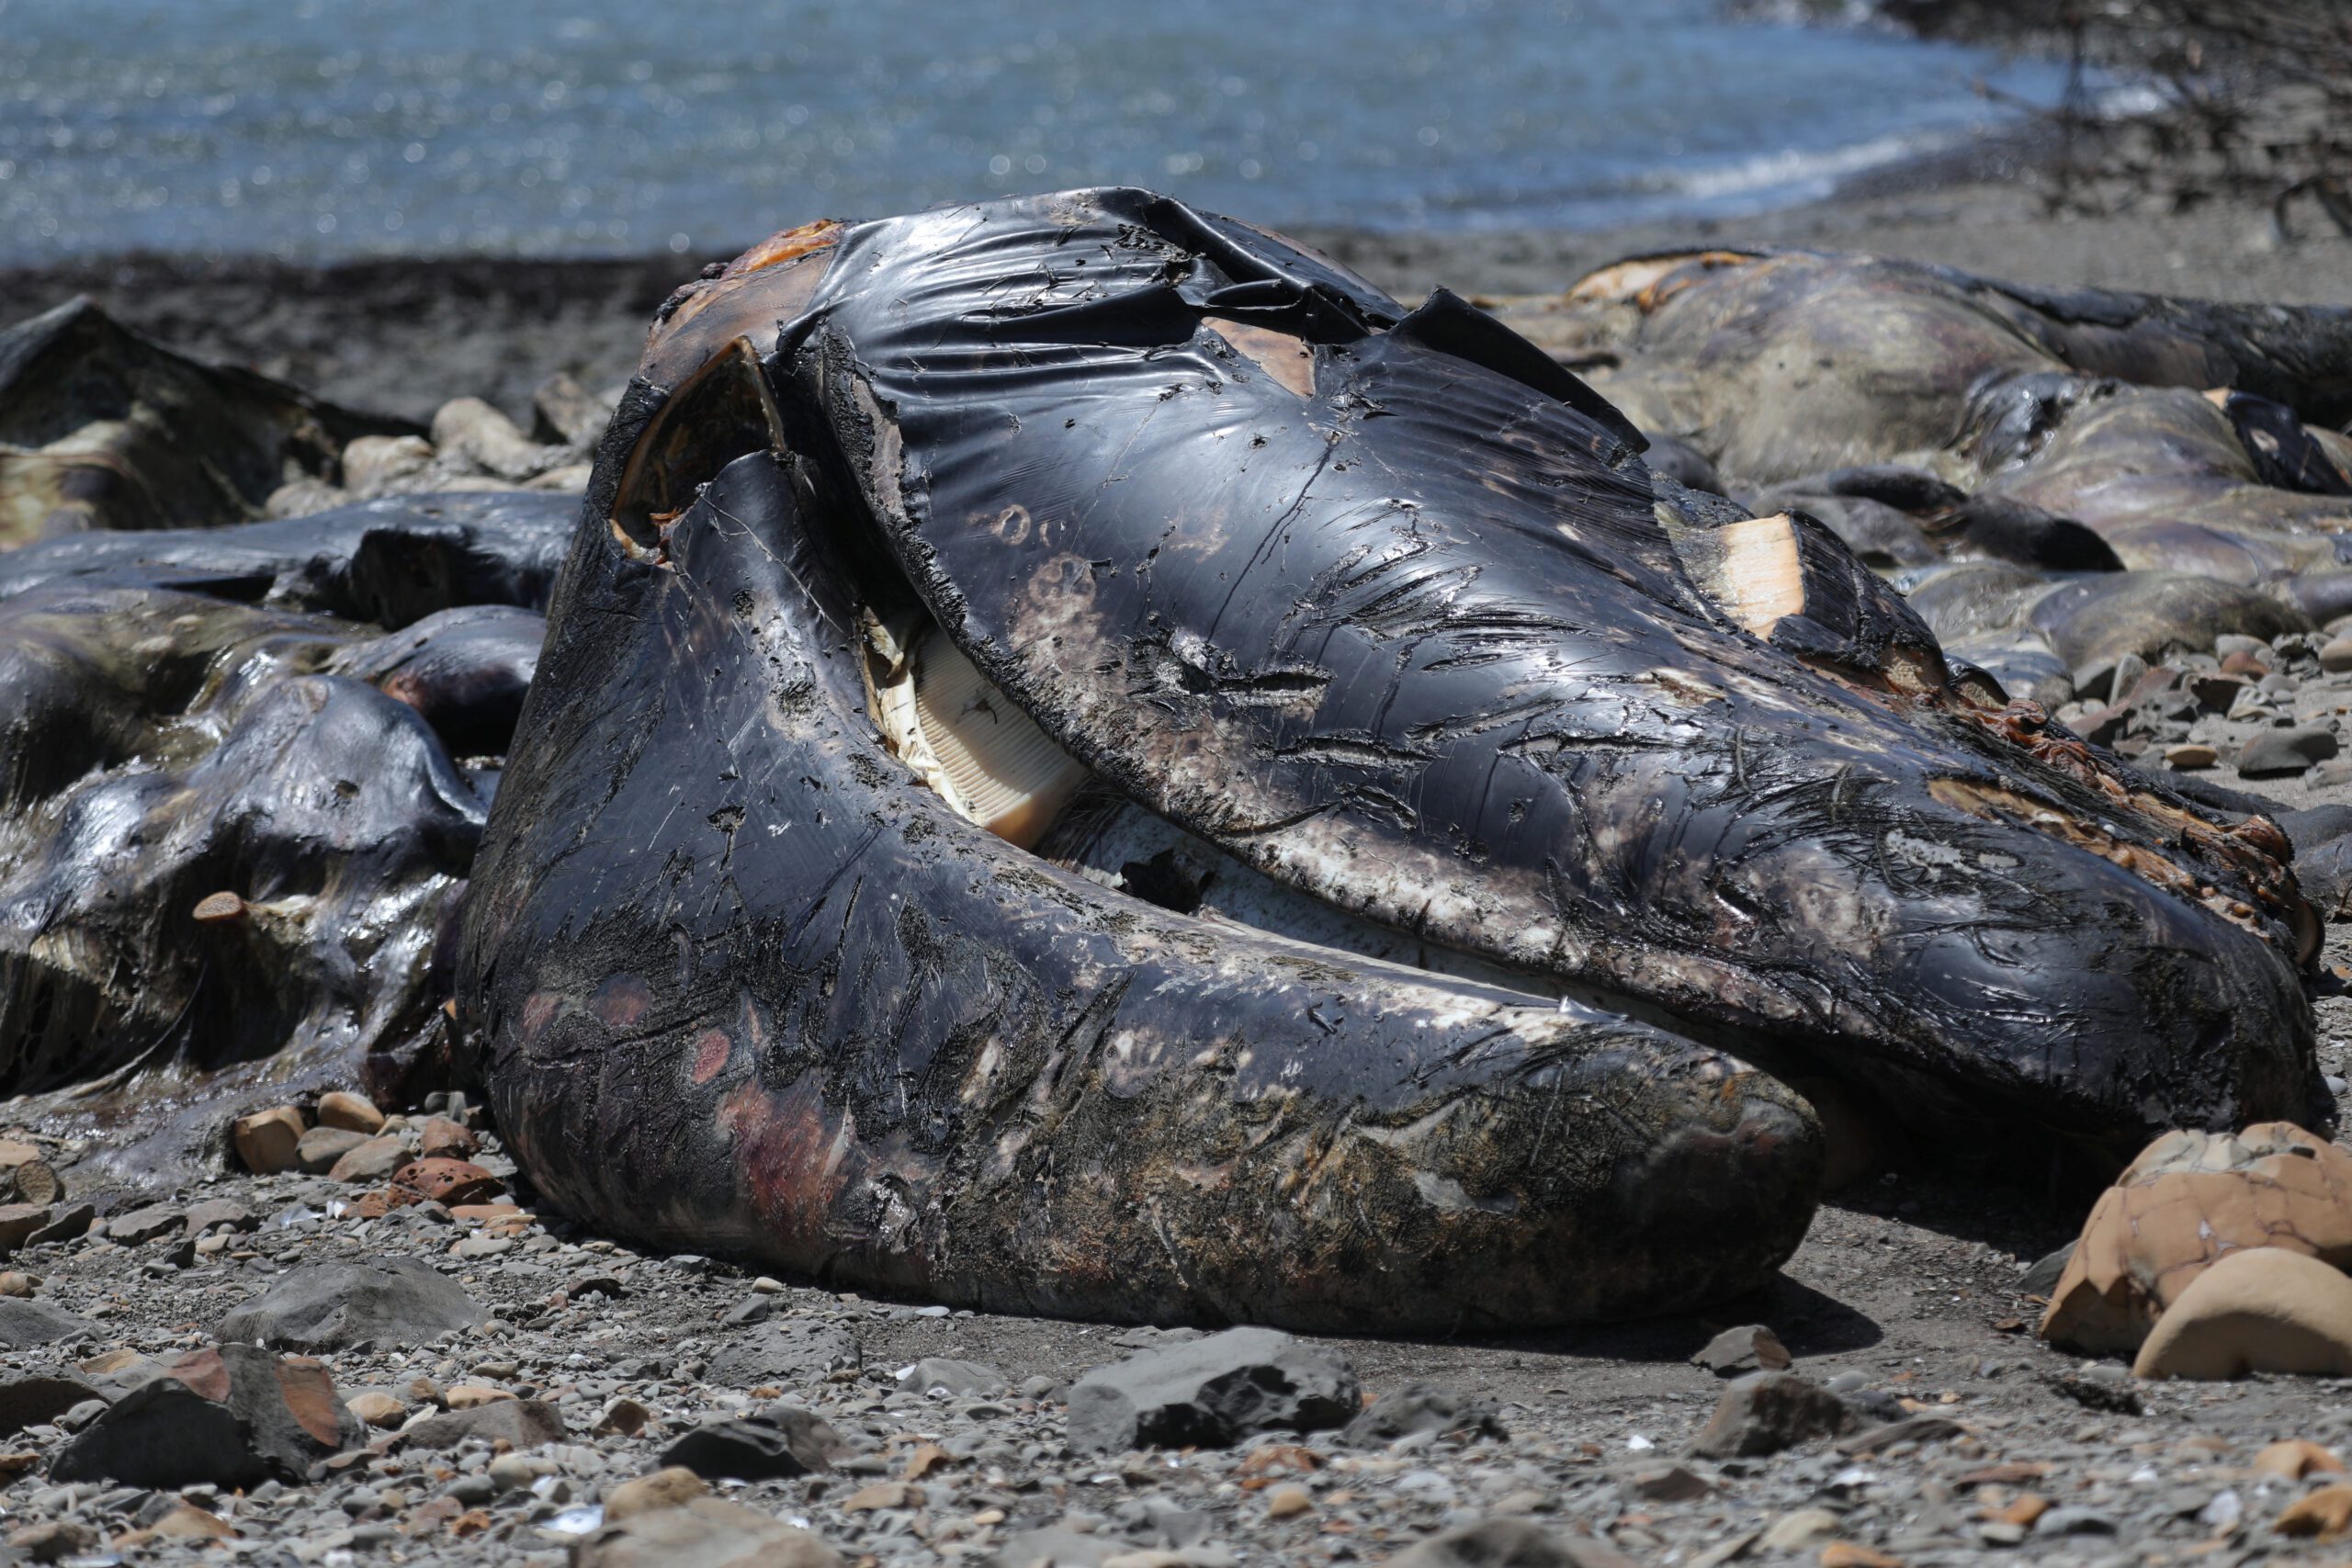 The body of a 37-foot adult male gray whale washed ashore is seen decomposing on Agate Beach near Bolinas, California, U.S., May 9, 2023. REUTERS/Nathan Frandino